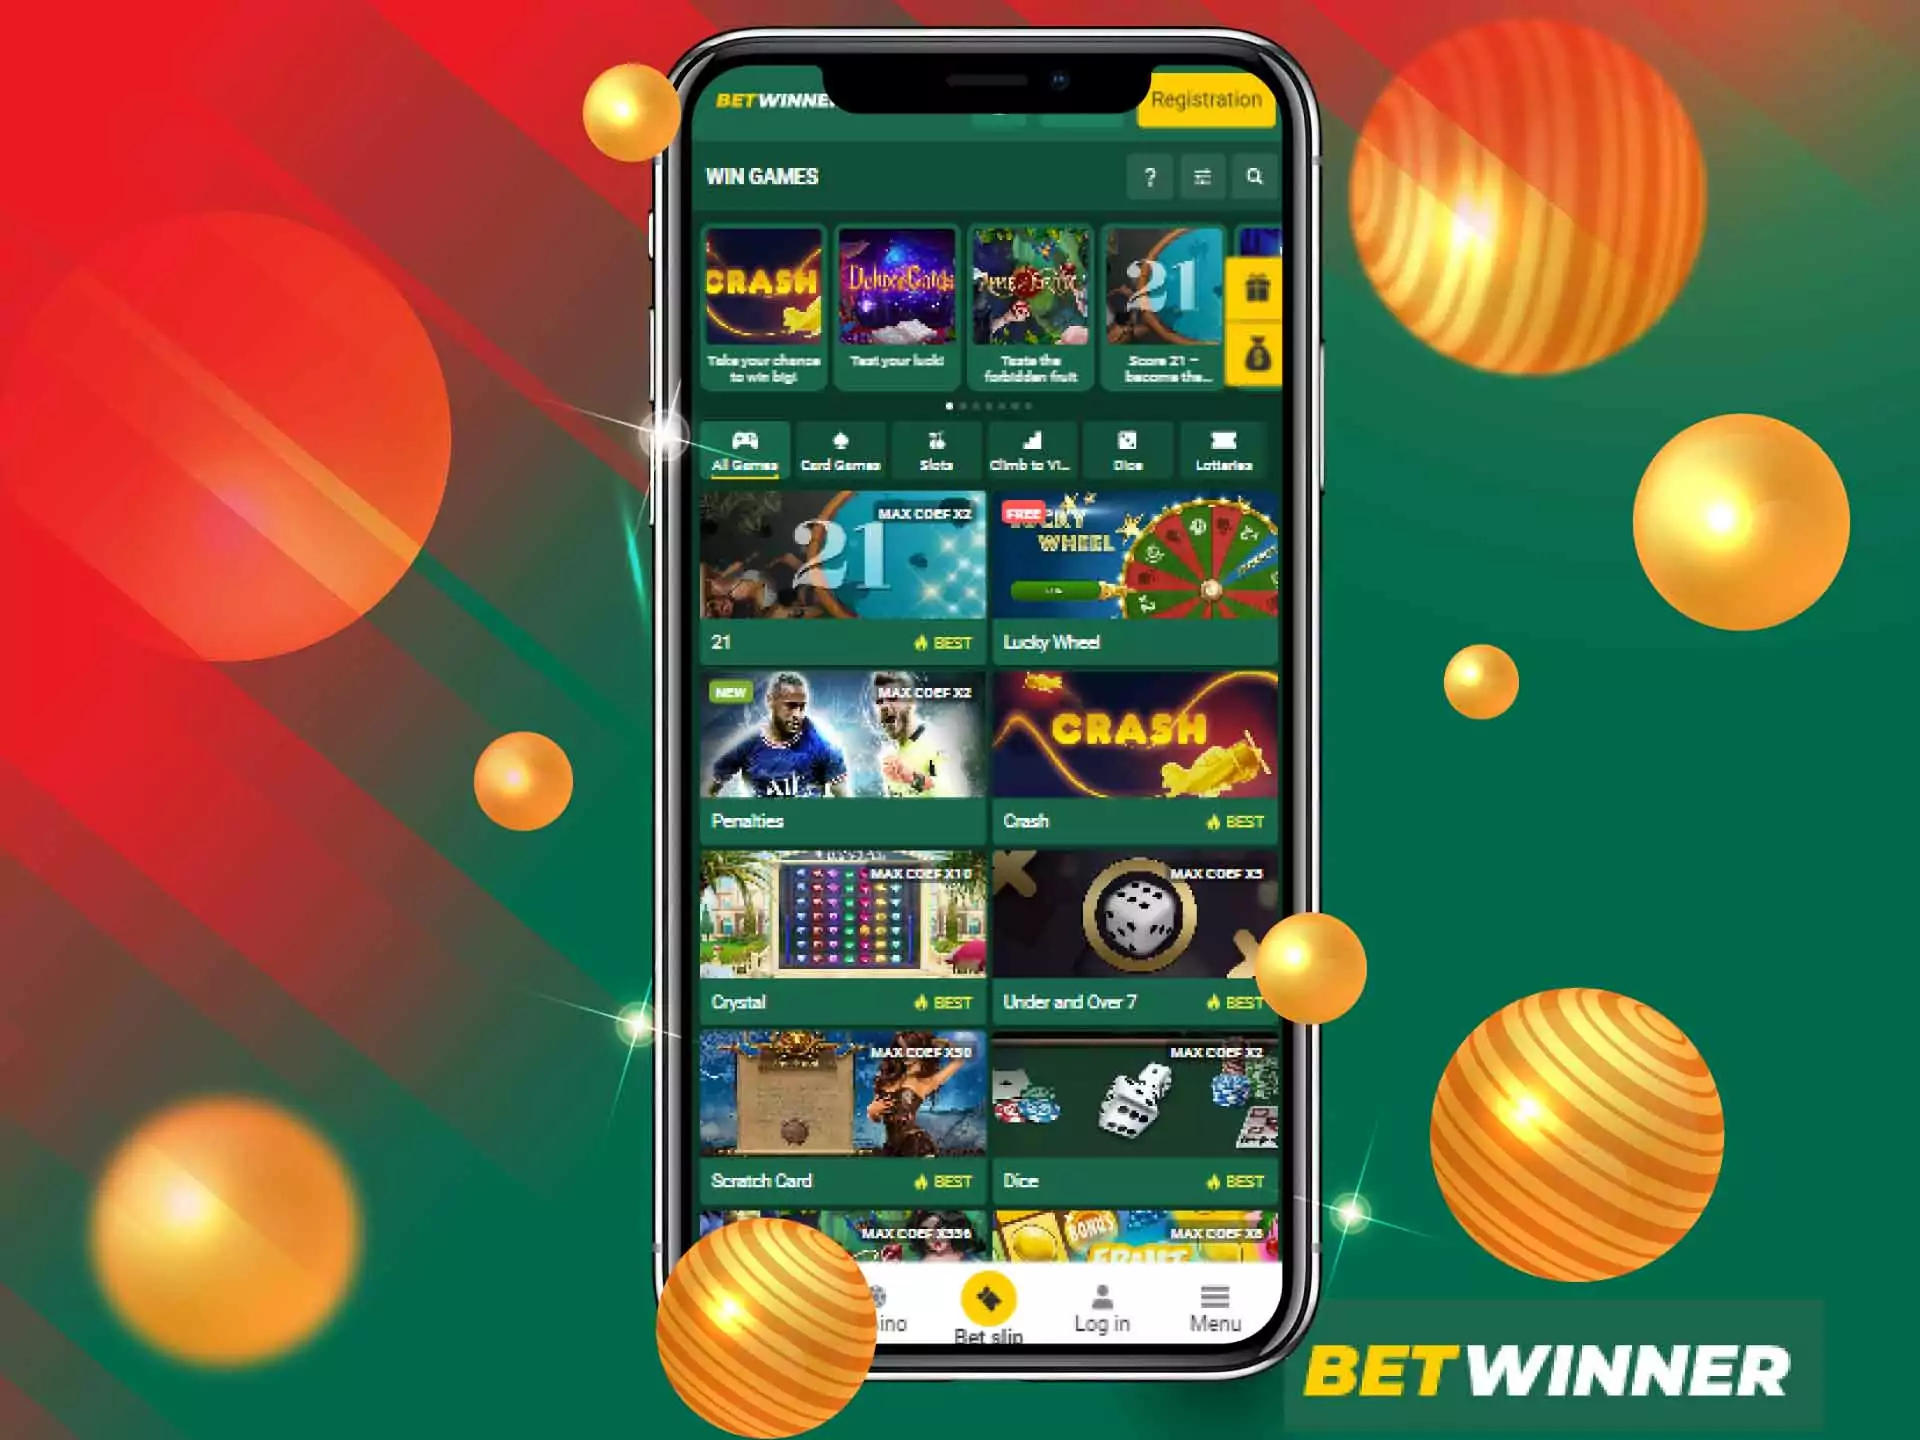 Play special games in the Betwinner casino to win even more.